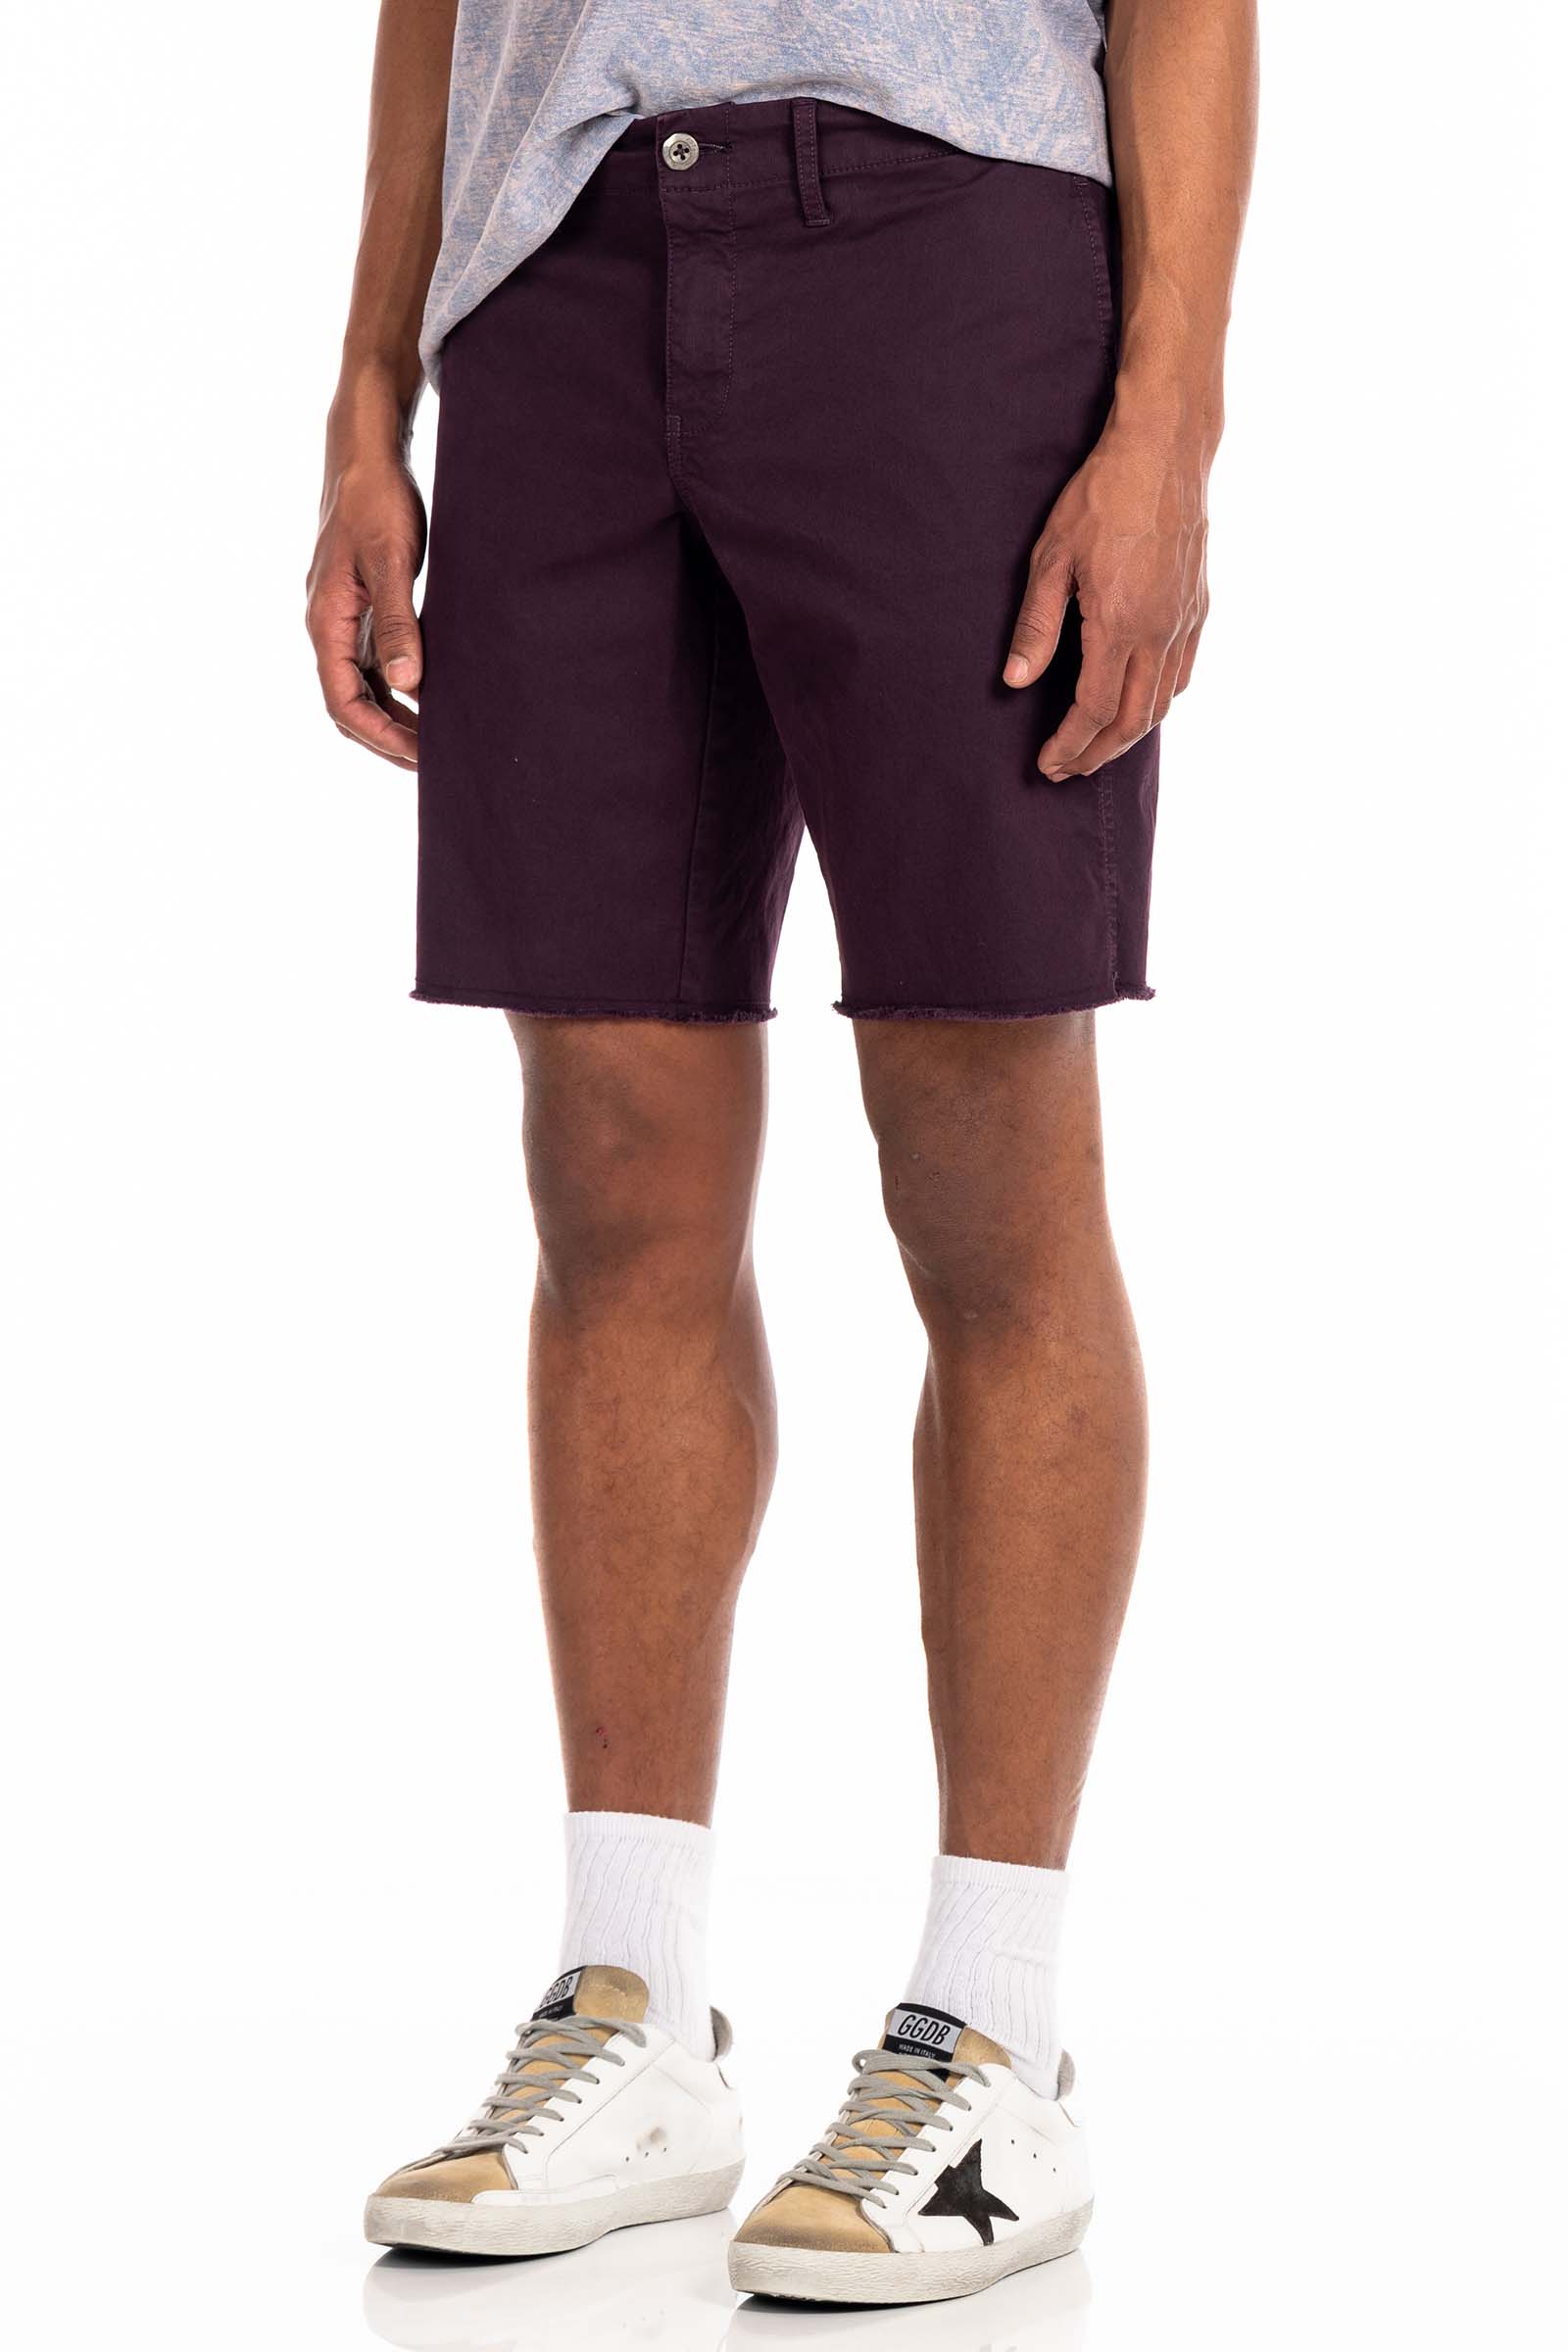 Original Paperbacks Rockland Chino Short in Plum on Model Cropped Side View